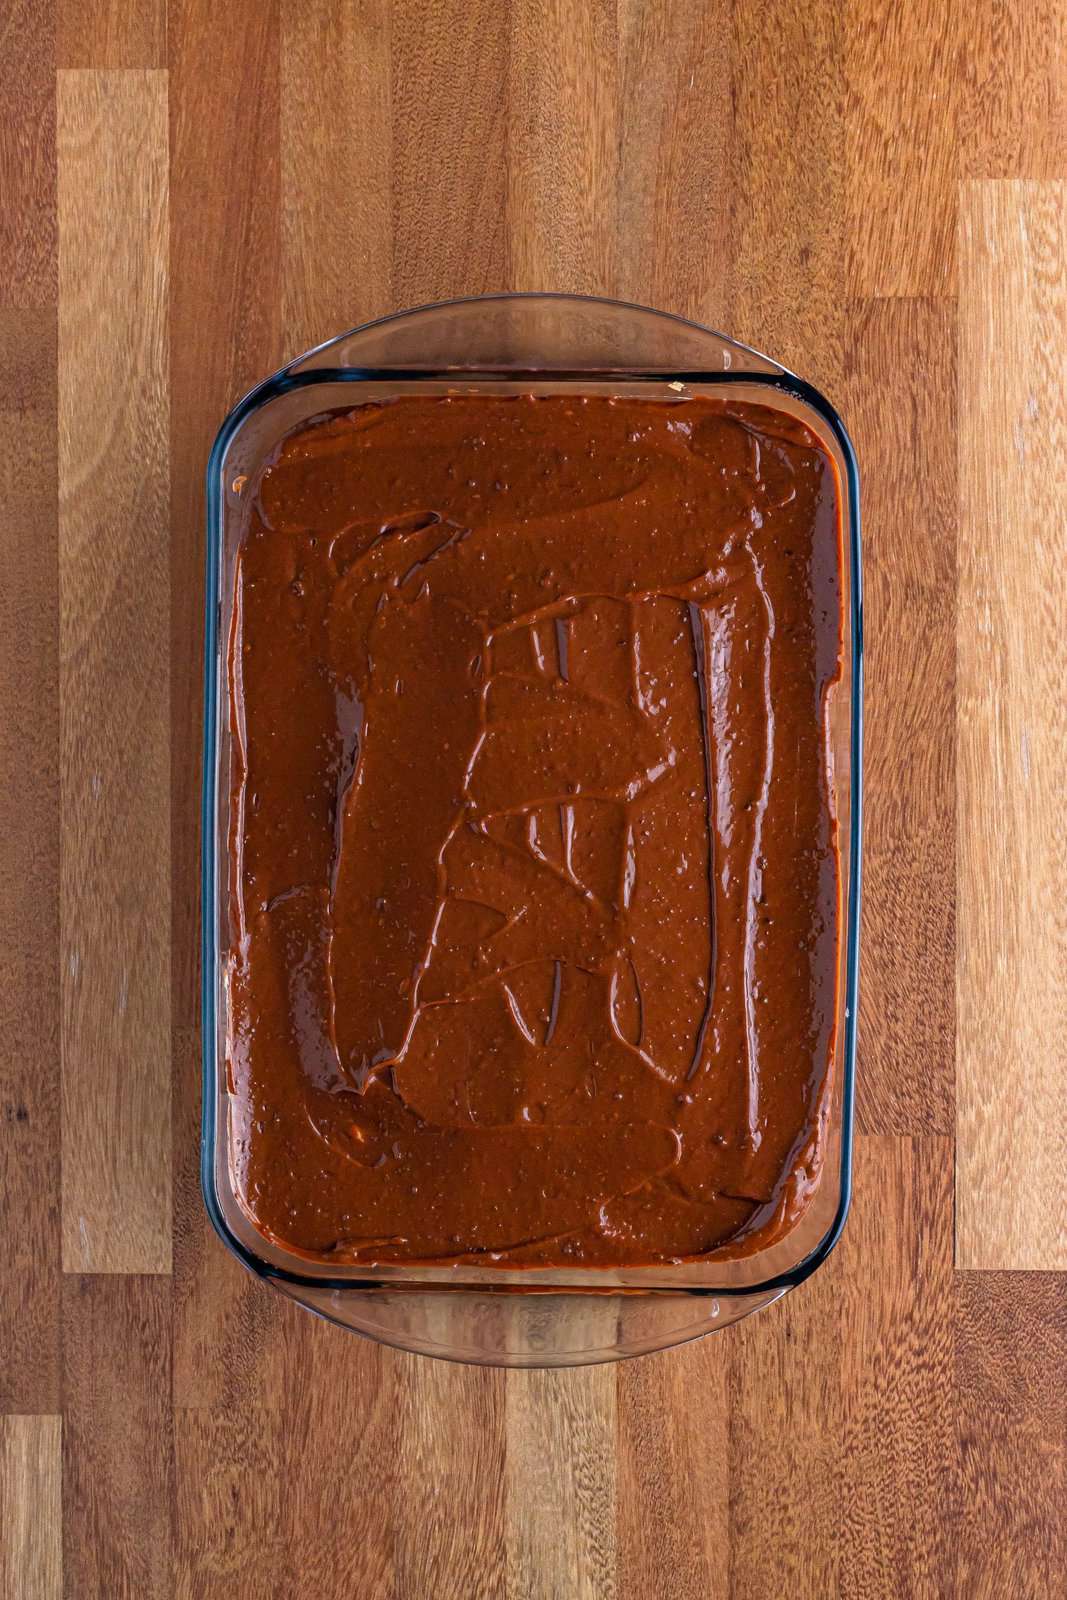 Chocolate pudding layered in a baking dish.